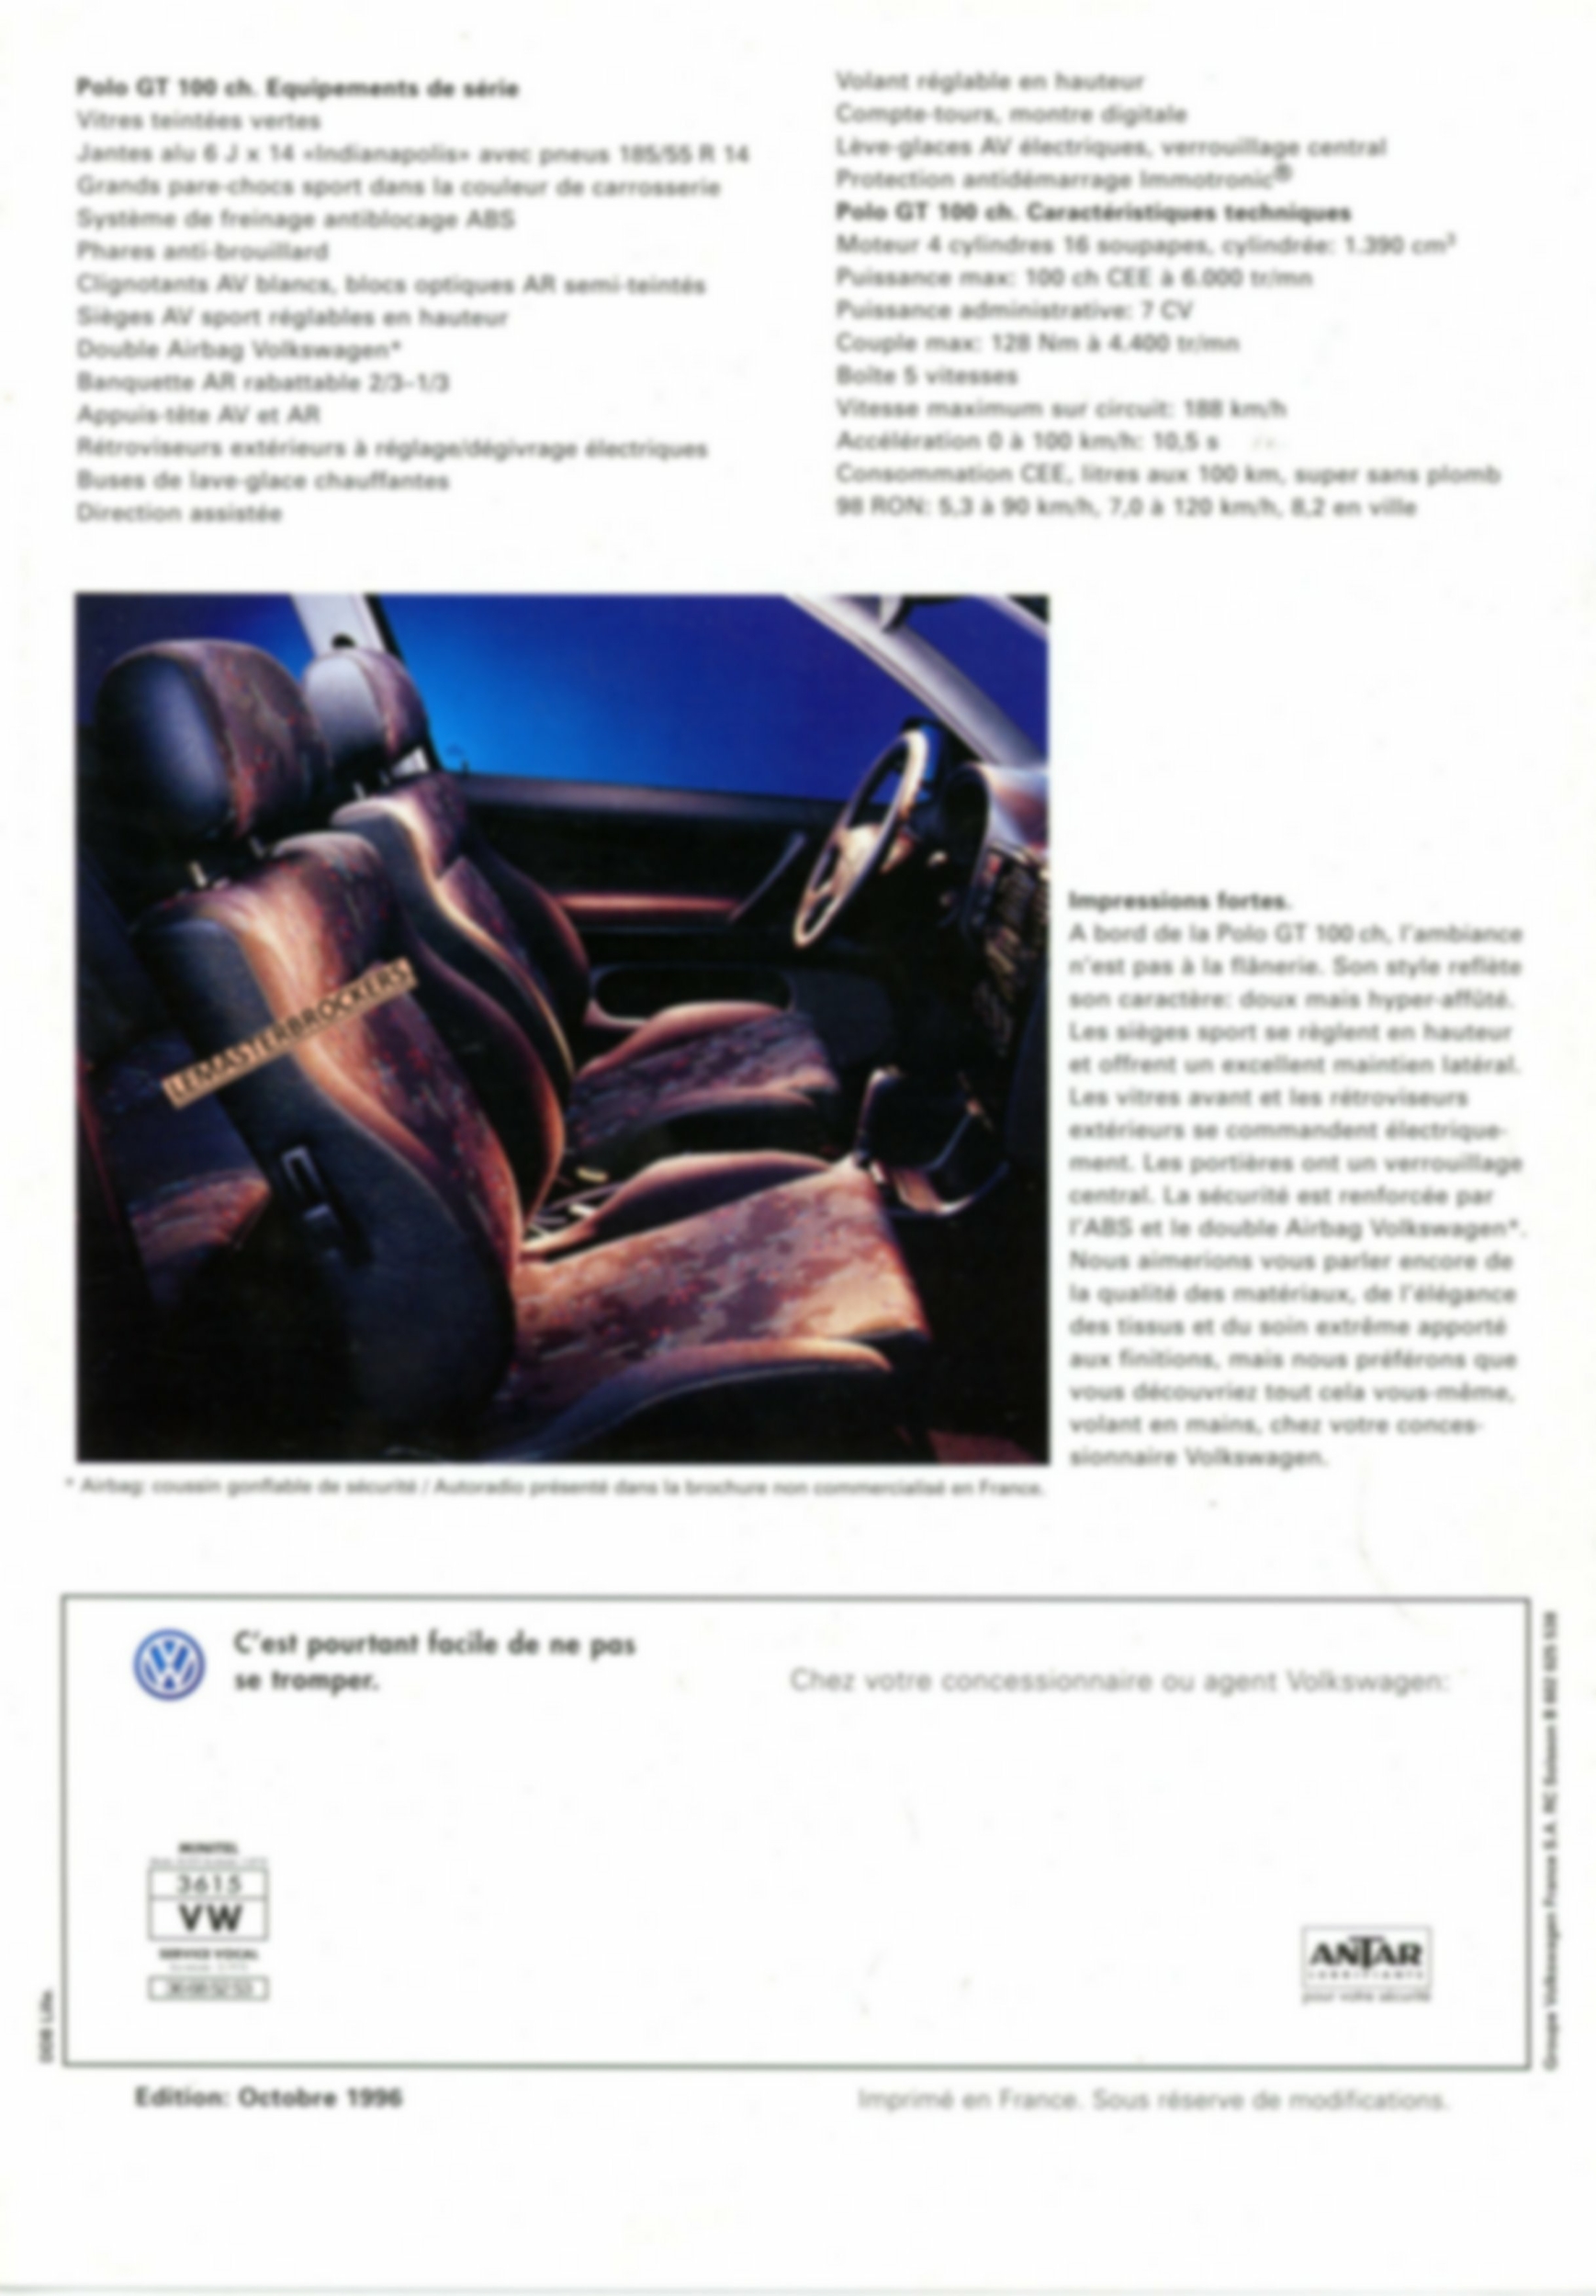 BROCHURE-AUTO-VW-POLO-GT-100CH-LEMASTERBROCKERS-CATALOGUE-VOITURE